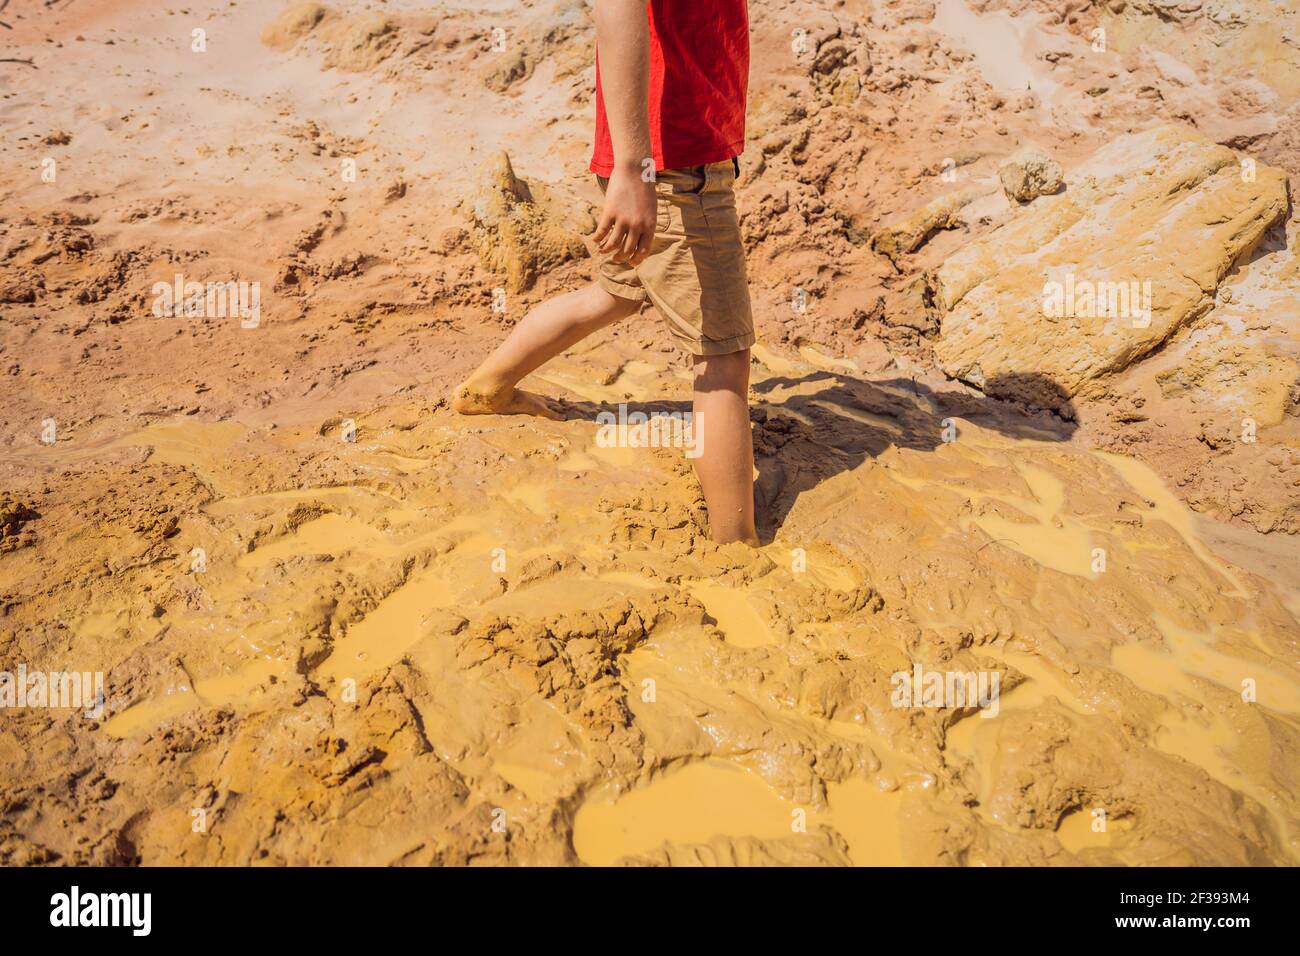 Unlucky buried person standing in natural quicksand river, clay sediments, sinking, drowning quick sand, stuck in the soil, trapped and stuck concept Stock Photo